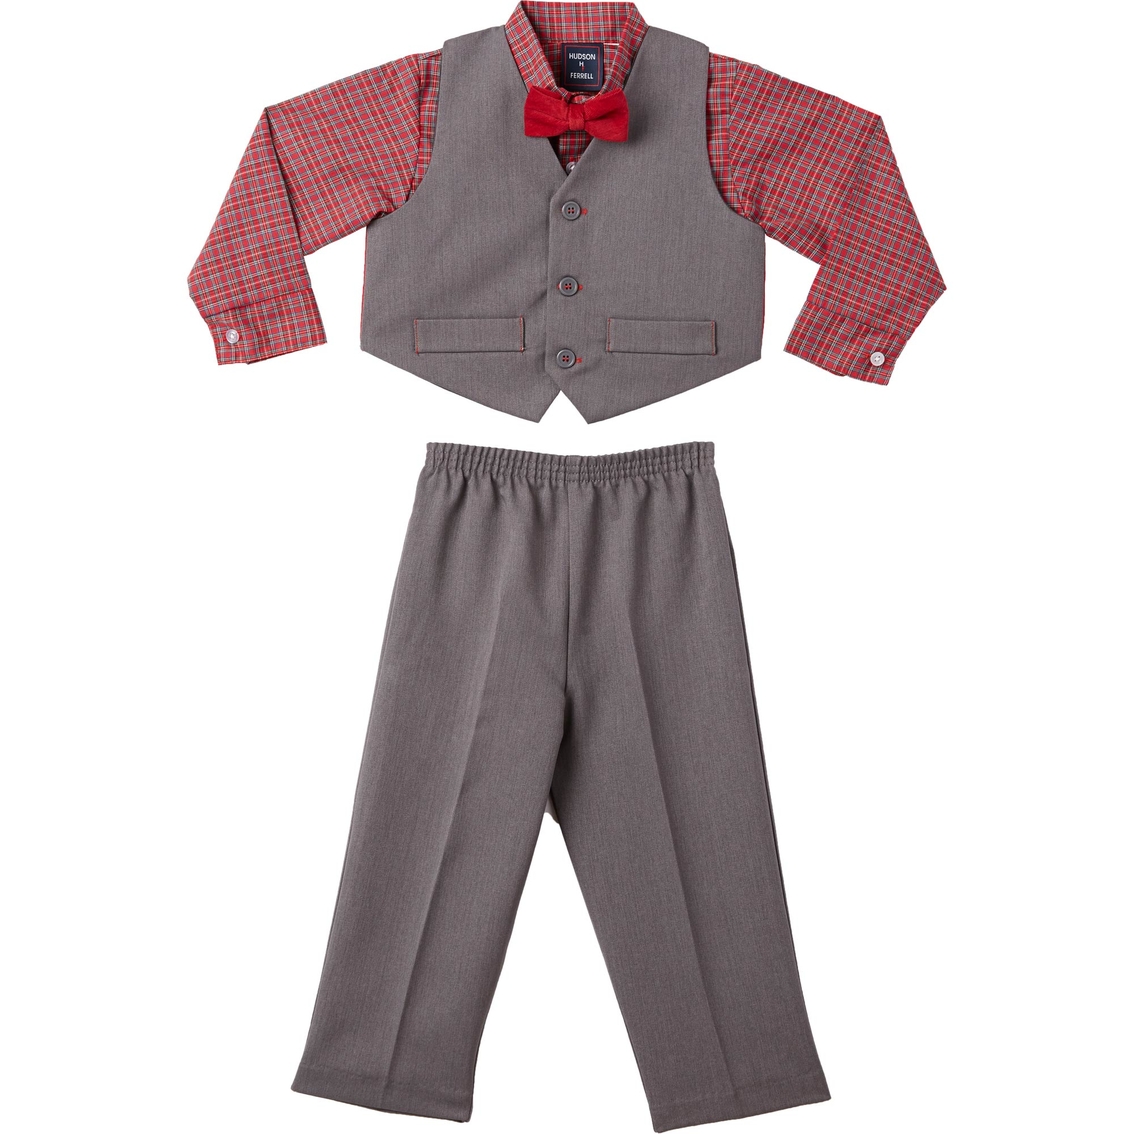 Hudson Ferrell Toddler Boys Special Occasion Wear Set | Toddler Boys 2t-4t  | Clothing & Accessories | Shop The Exchange